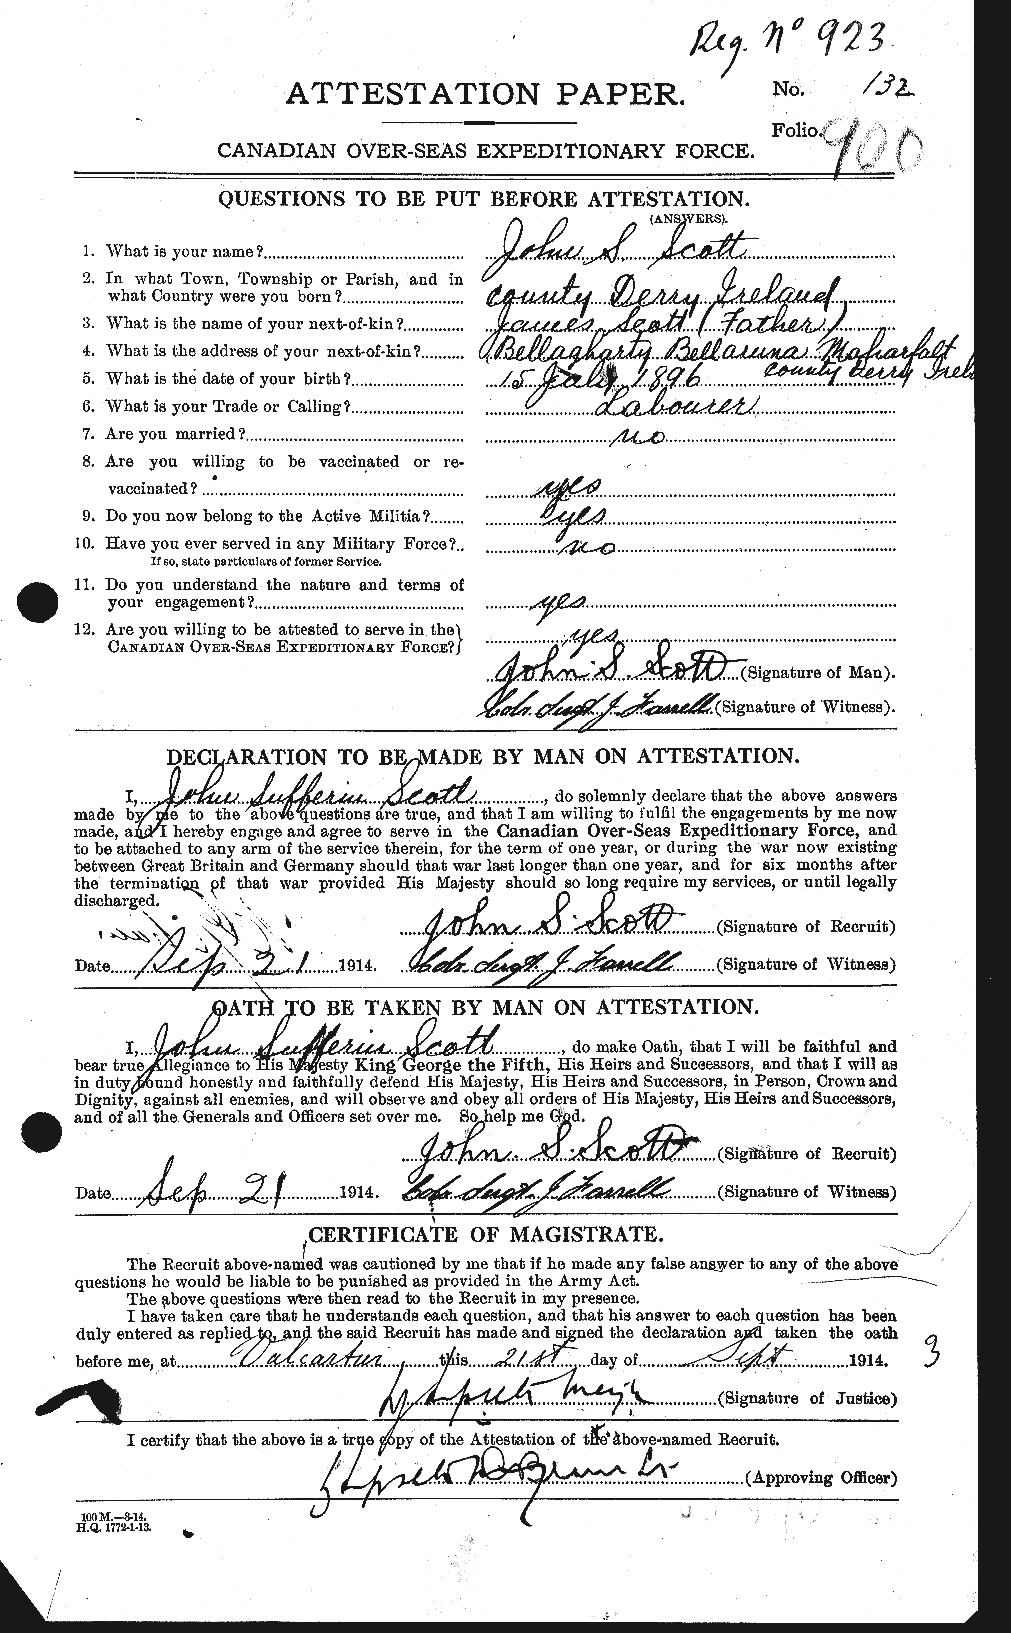 Personnel Records of the First World War - CEF 084420a